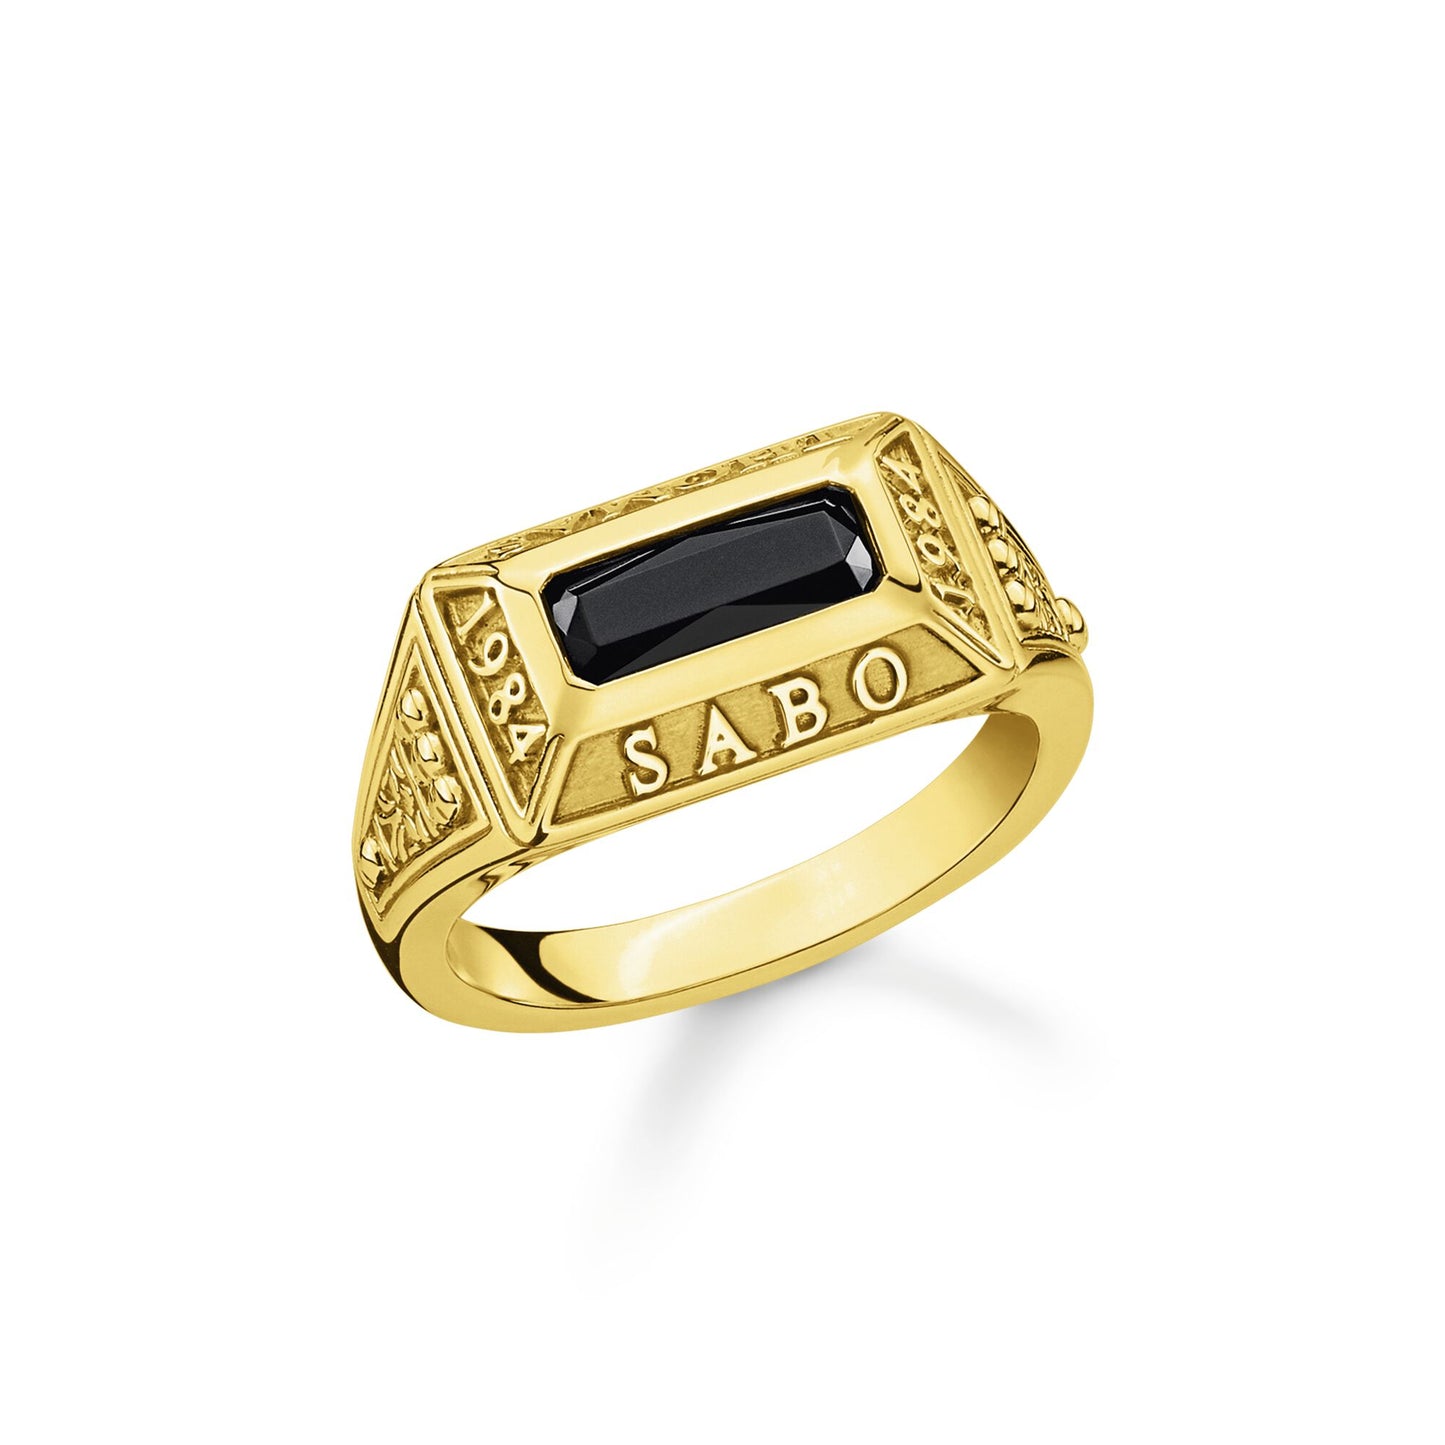 GENTS STERLING SILVER YELLOW GOLD PLATED THOMAS SABO 1984 ONYX SIGNET RING SIZE 64